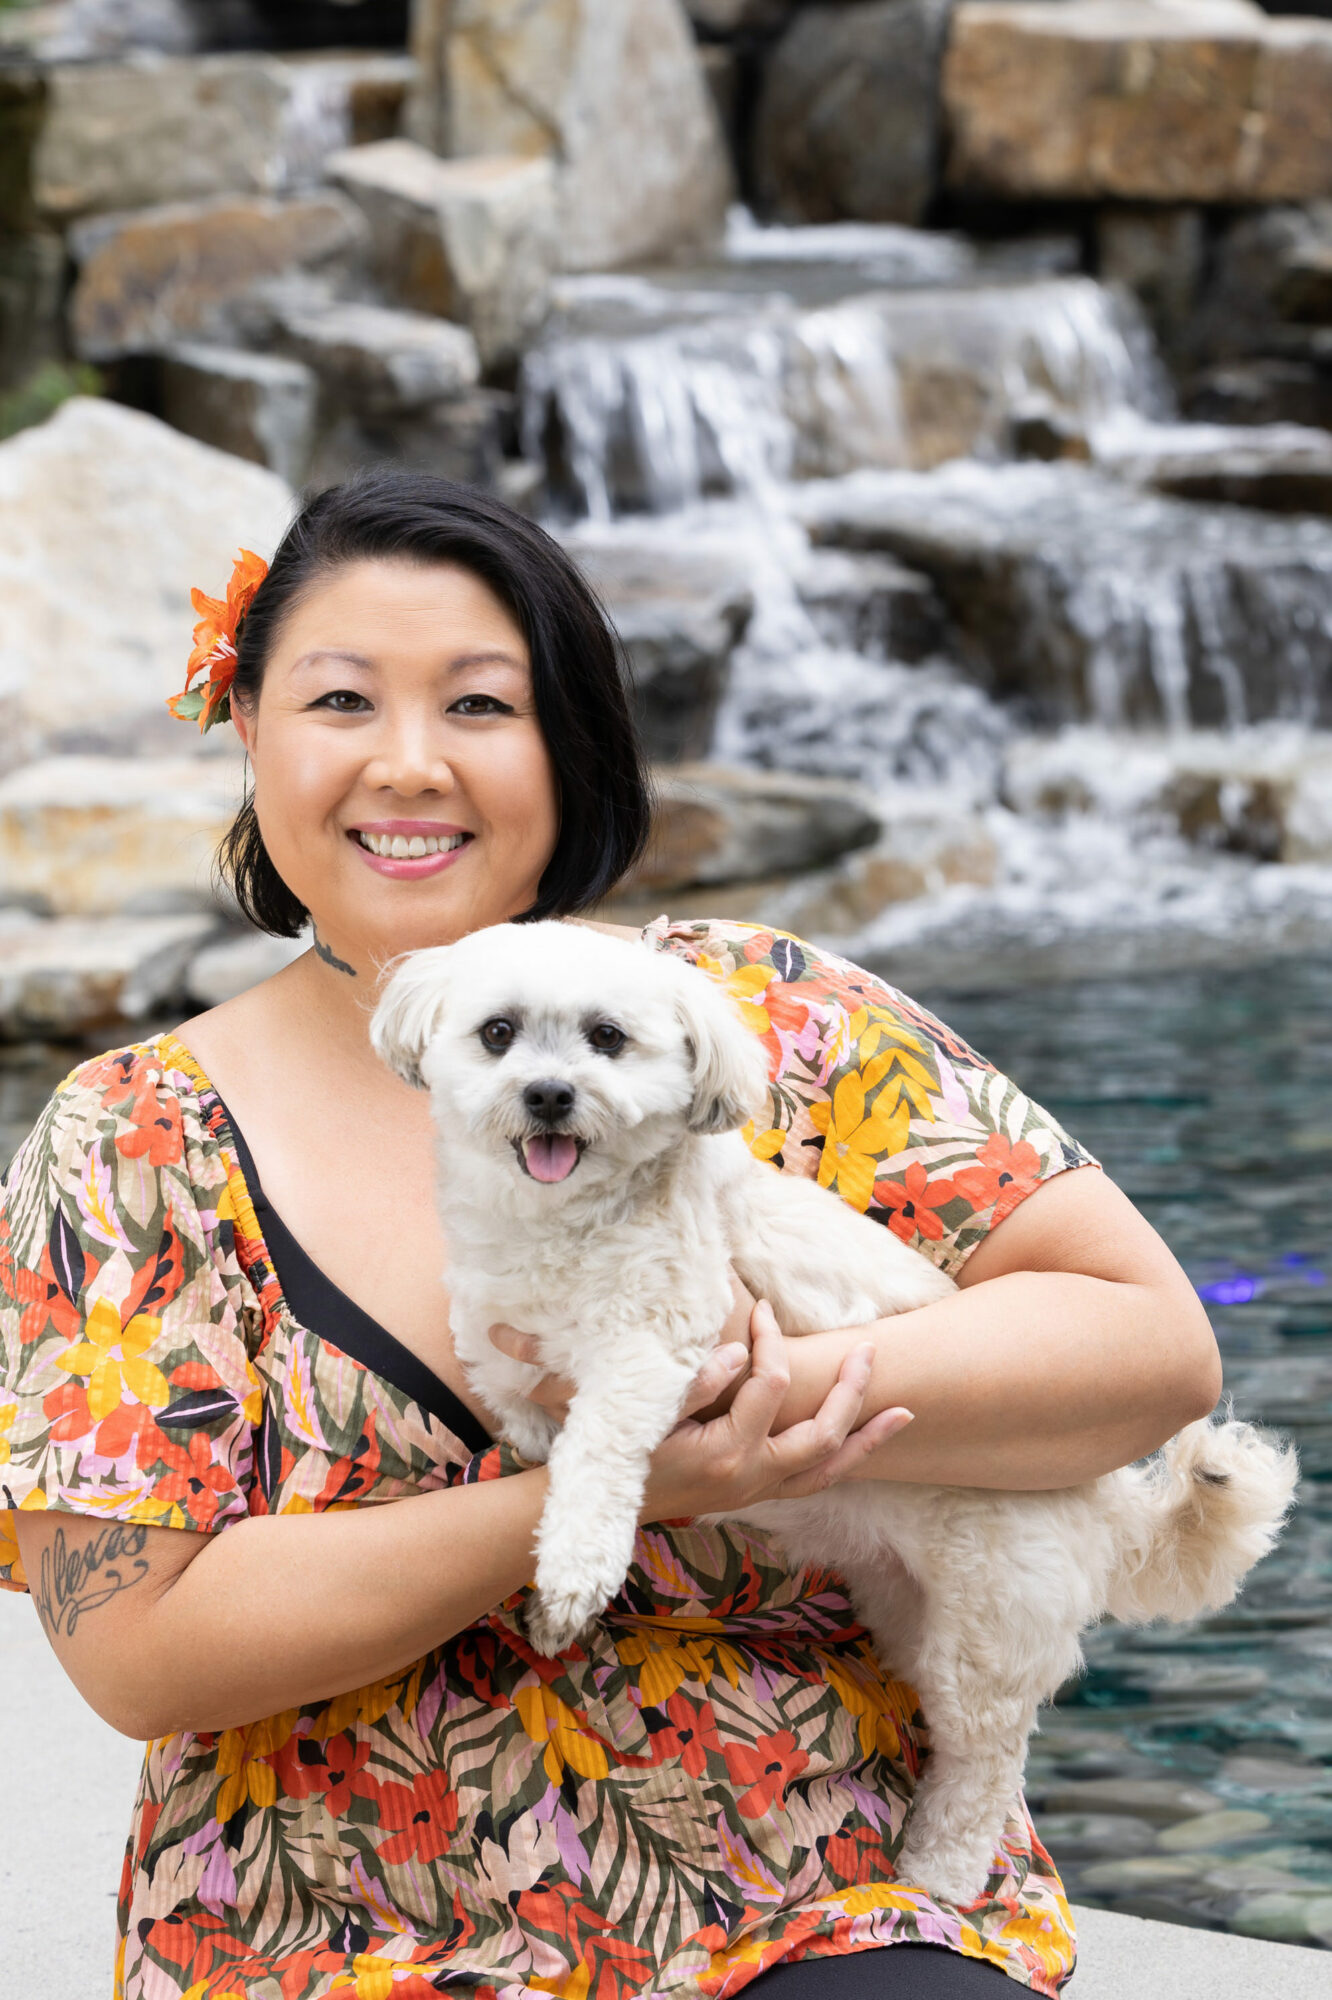 Empowered Voices member wearing a multicolored floral blouse, holding a small white dog with a multi-tiered rock waterfall in background